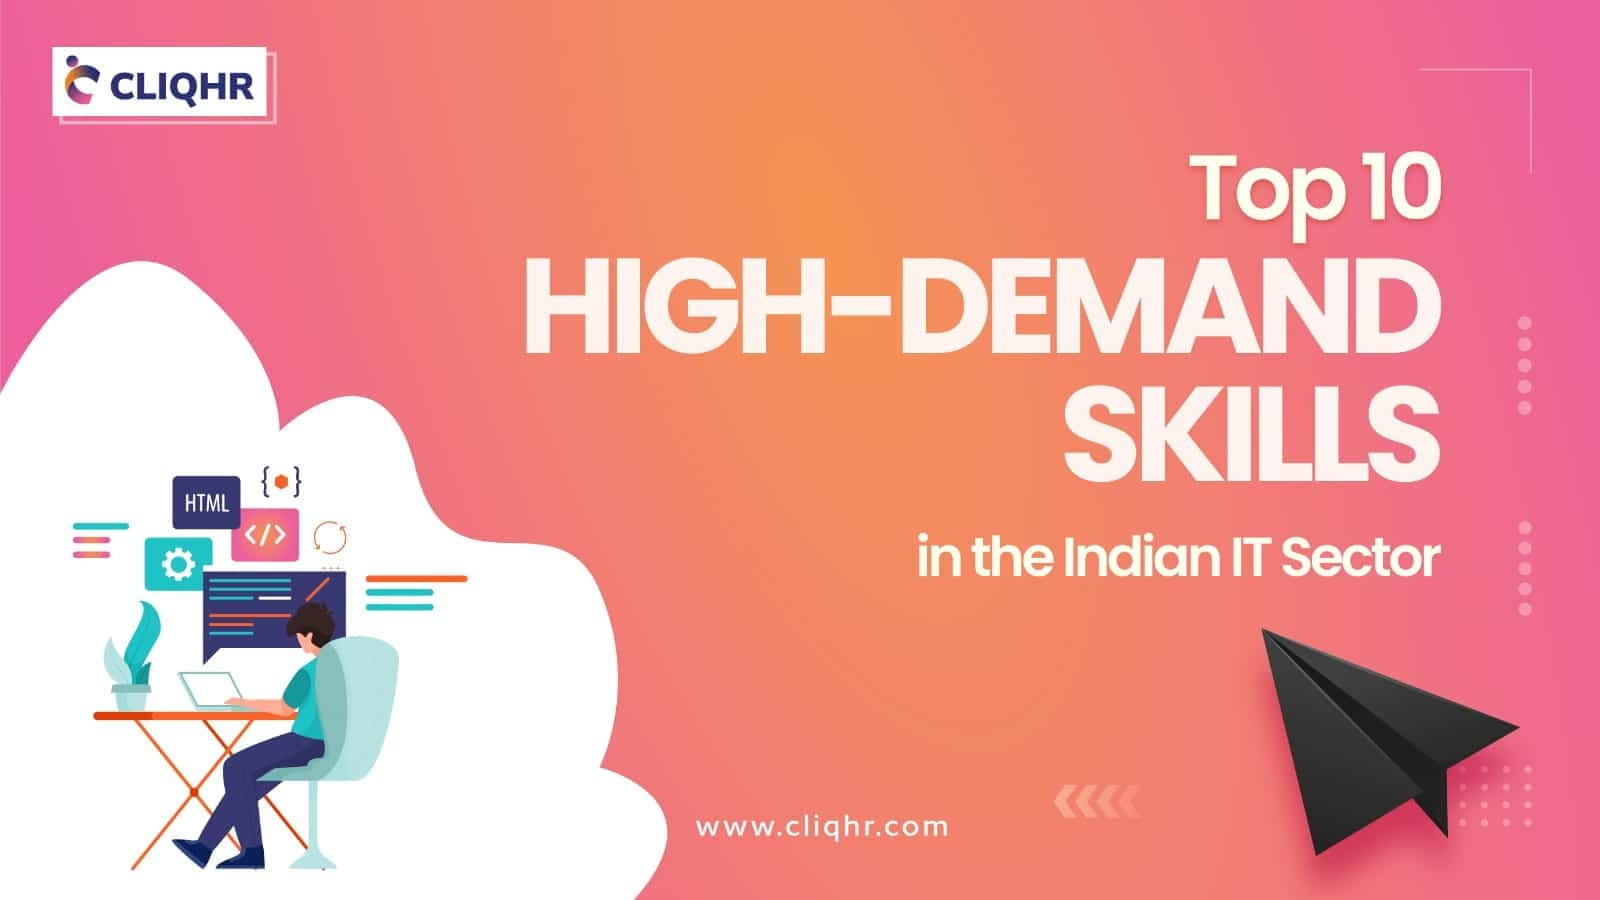 Top 10 High-Demand Skills in the Indian IT Sector